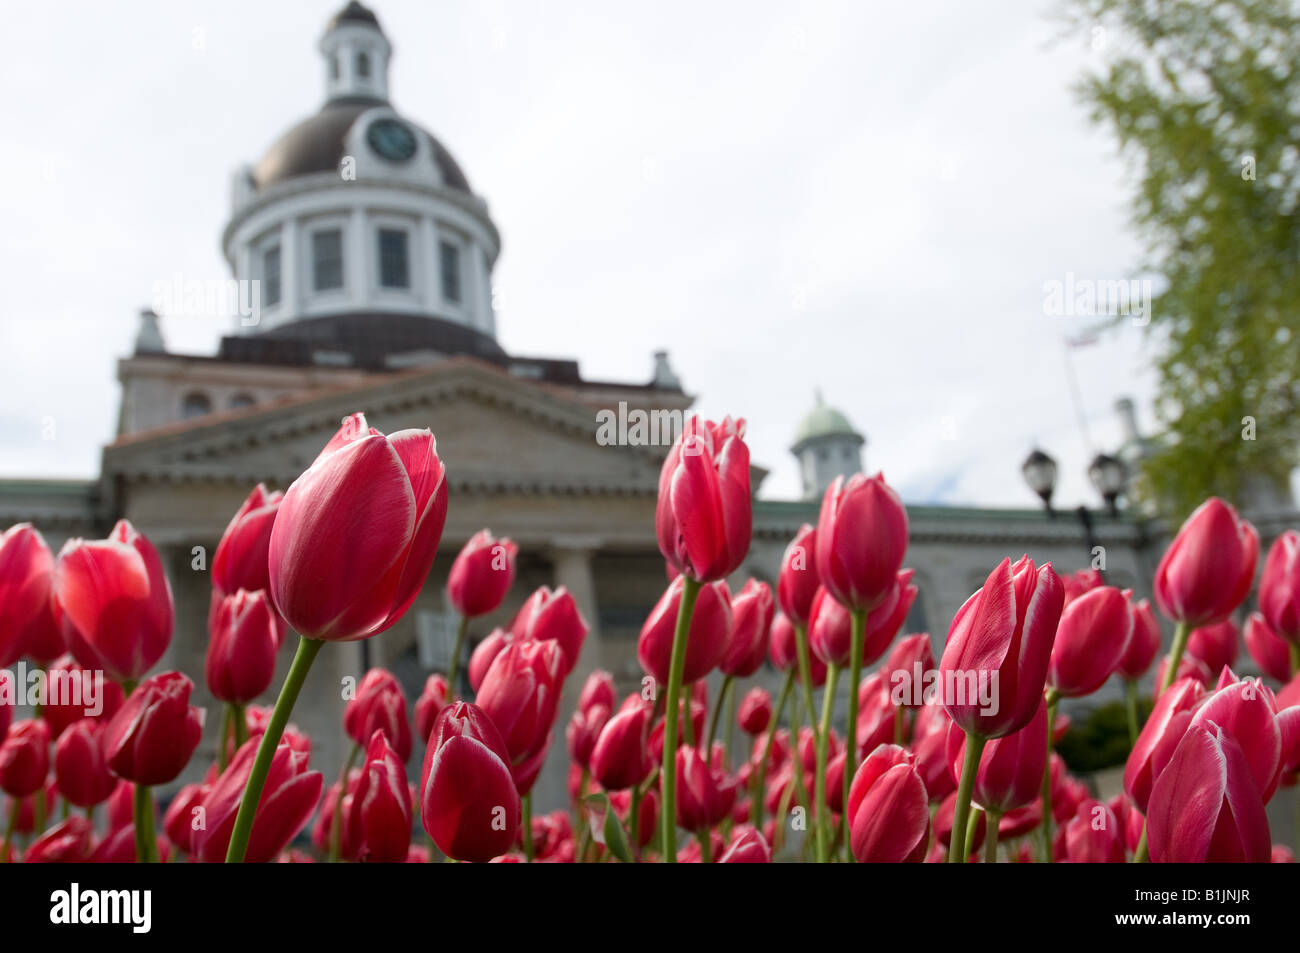 City Hall of Kingston, Ontario, Canada, with tulips infront Stock Photo